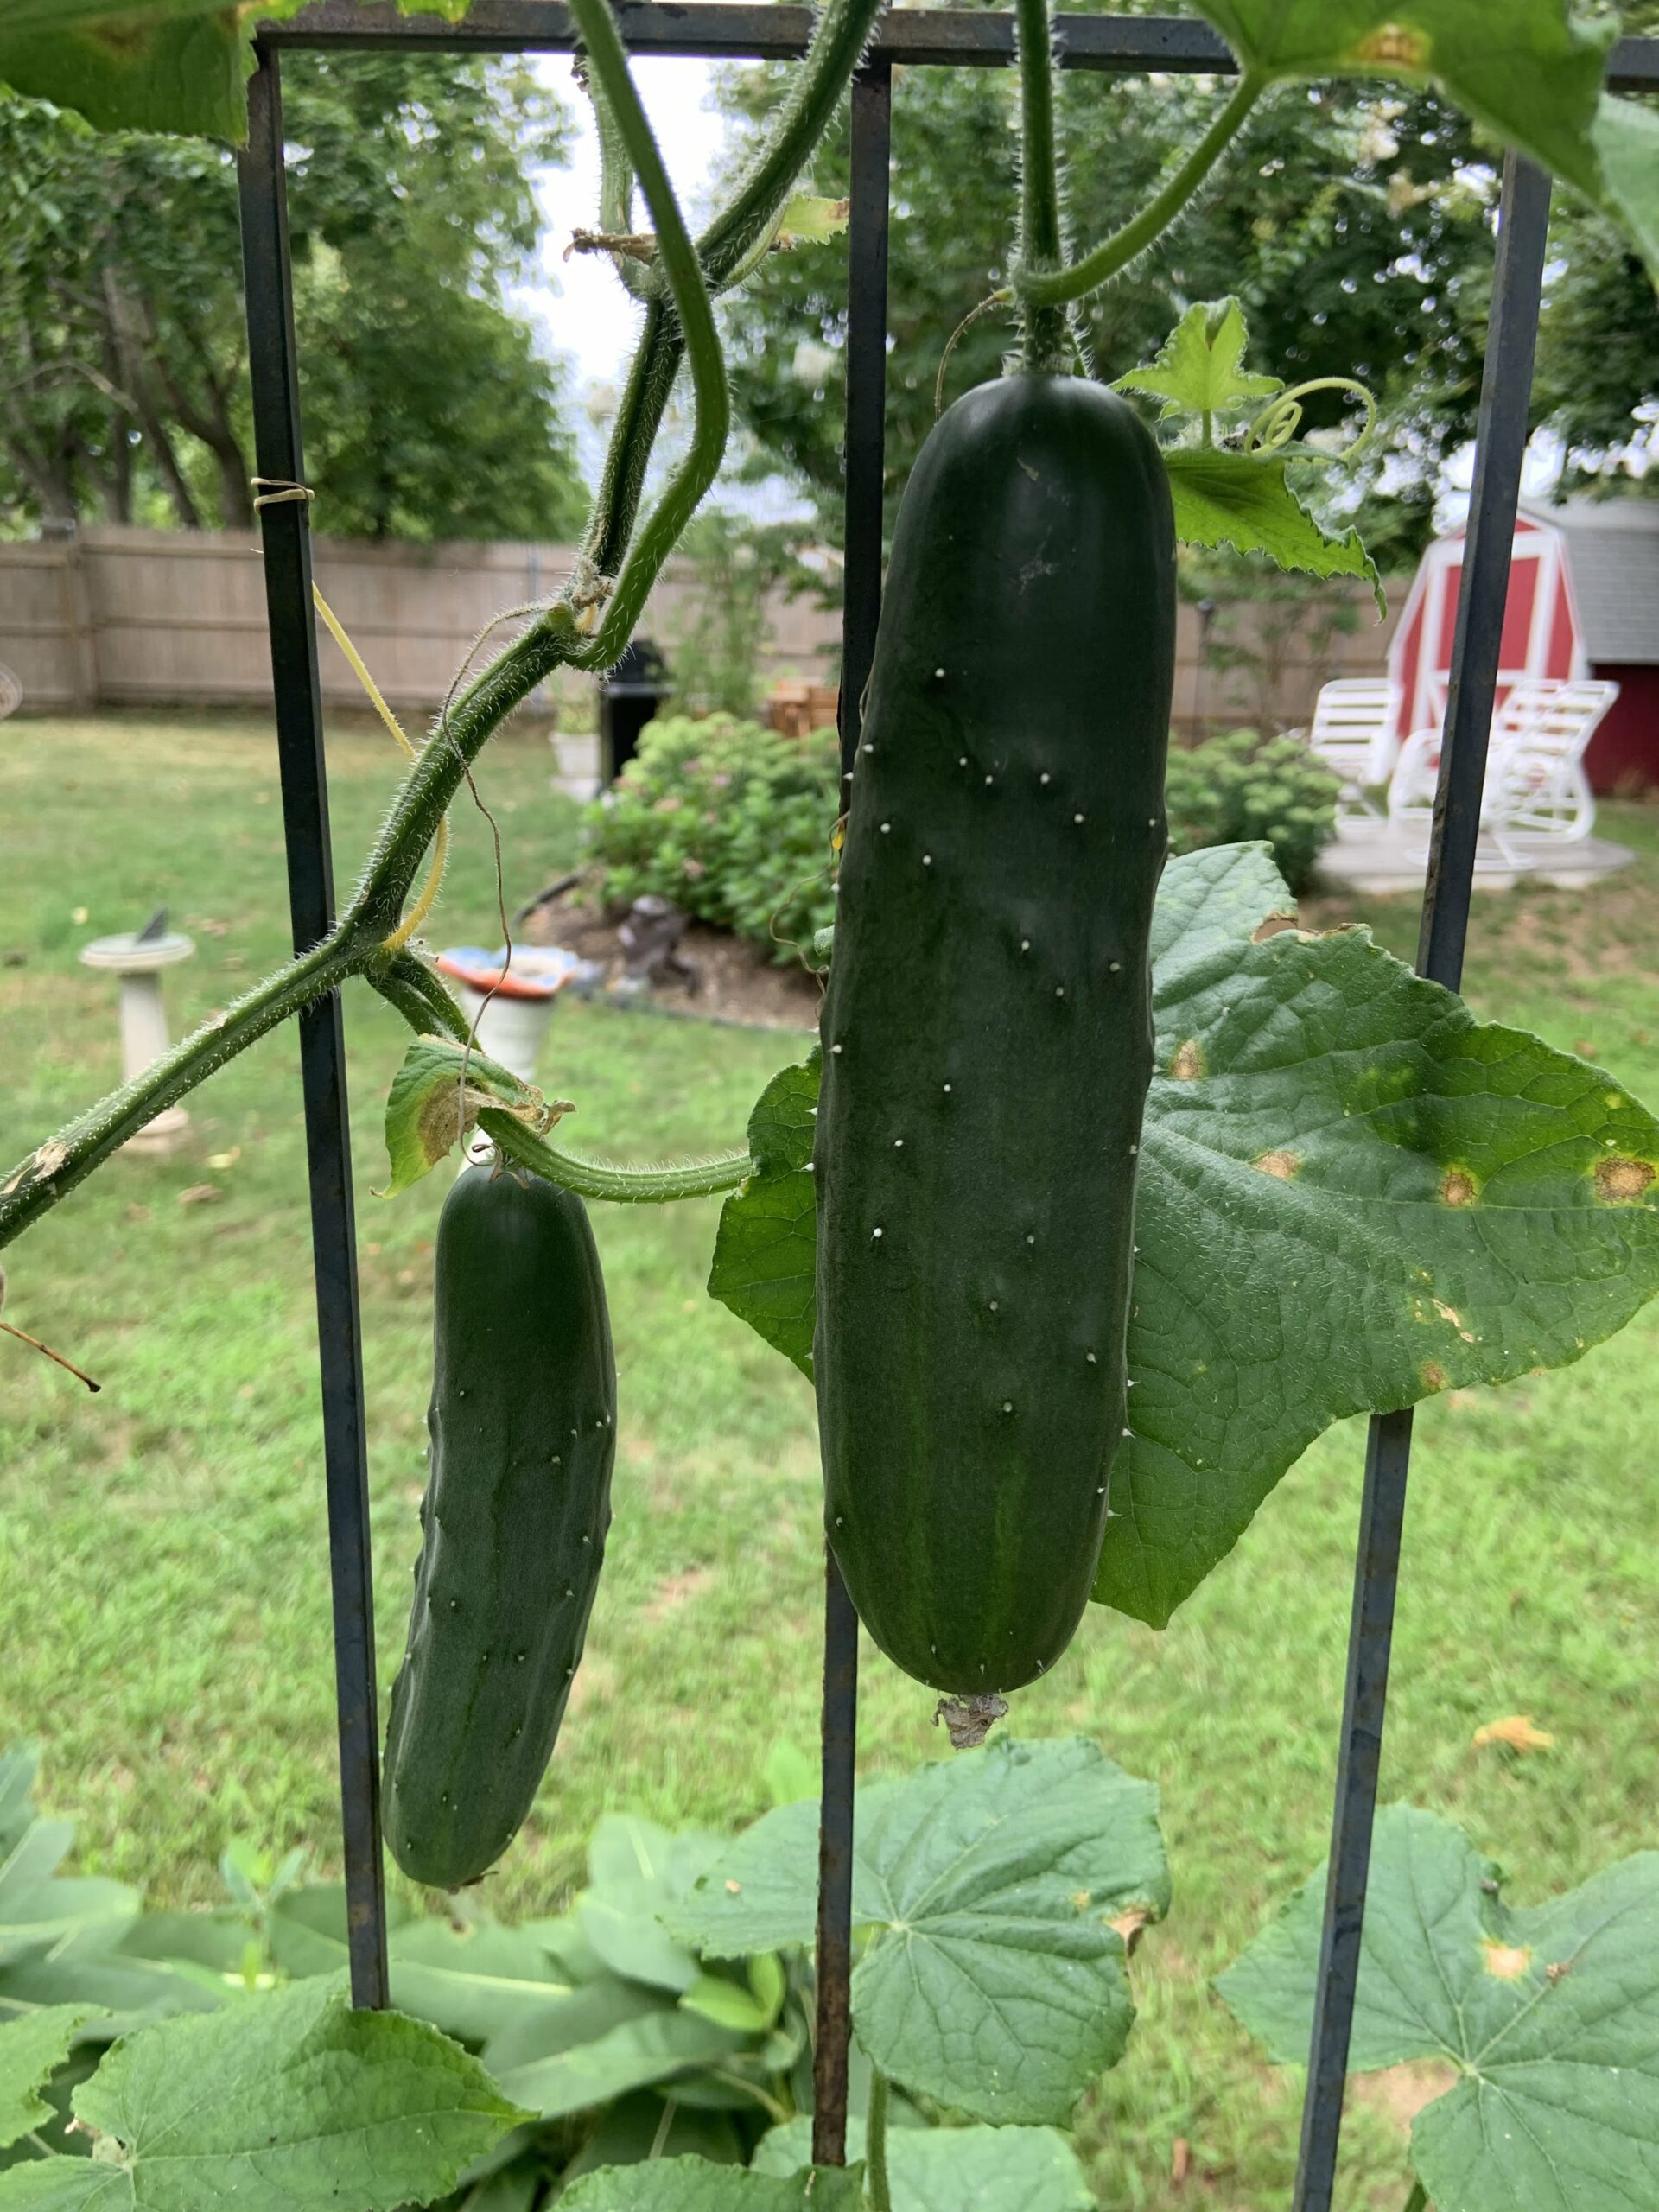 Plant cucumbers by early August for a fall crop. BRENDAN J. O'REILLY